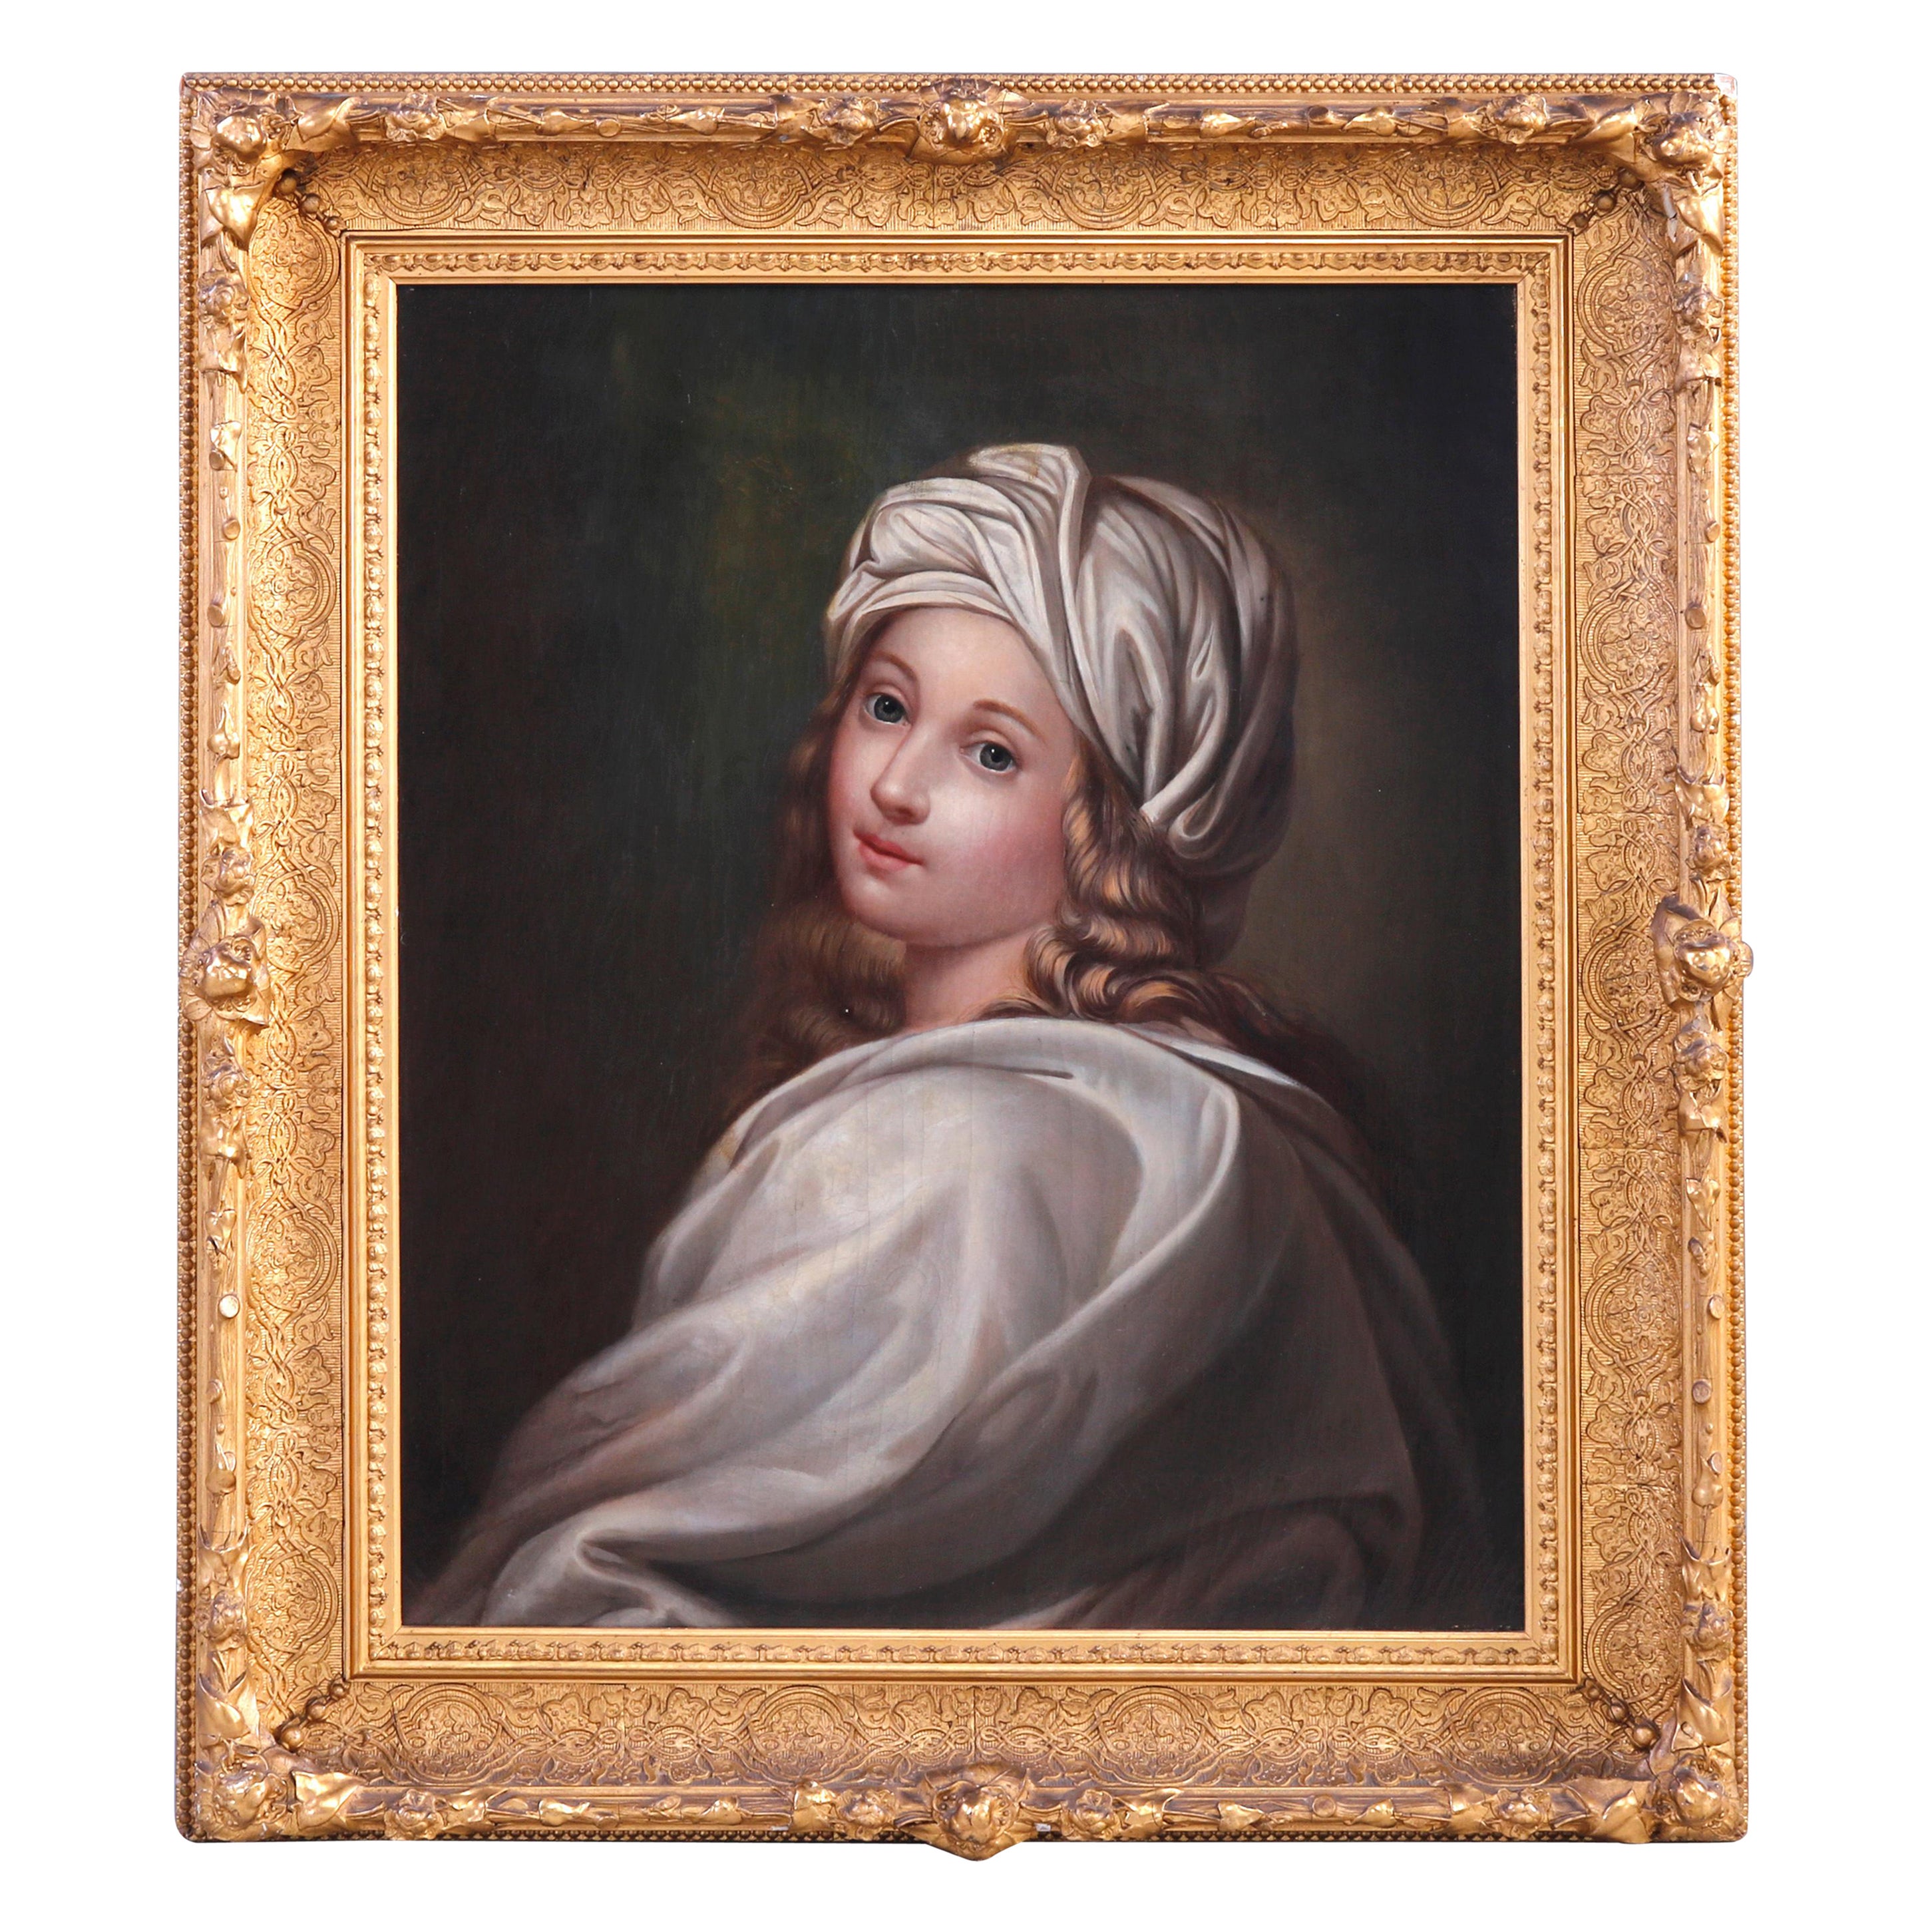 Antique Oil on Canvas Painting, Girl in White Turban Old Master Copy, circa 1850